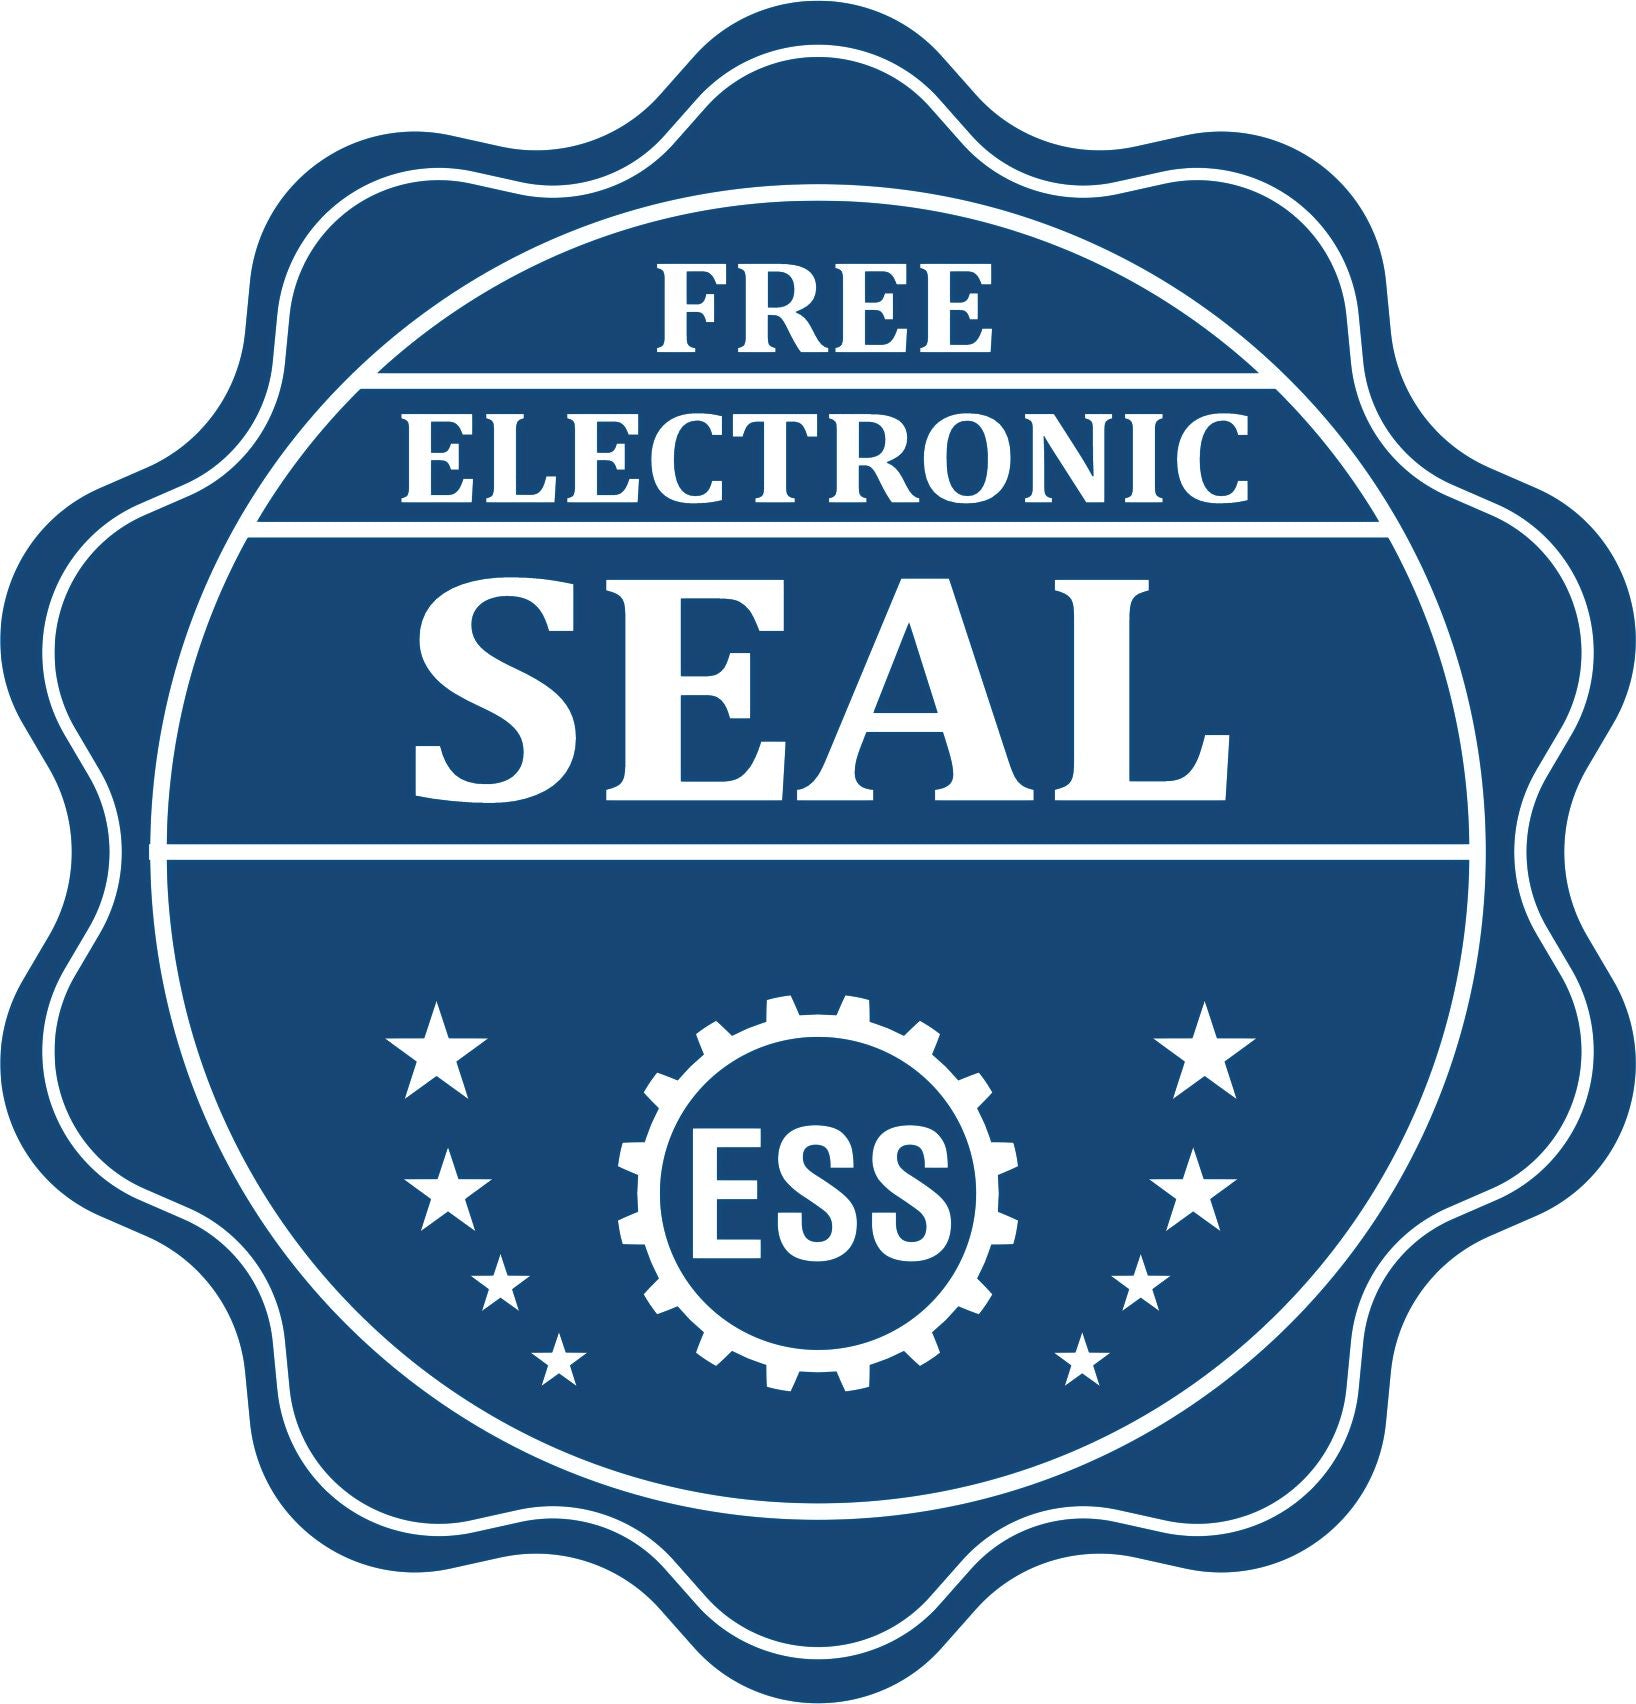 A badge showing a free electronic seal for the Handheld Oklahoma Professional Engineer Embosser with stars and the ESS gear on the emblem.